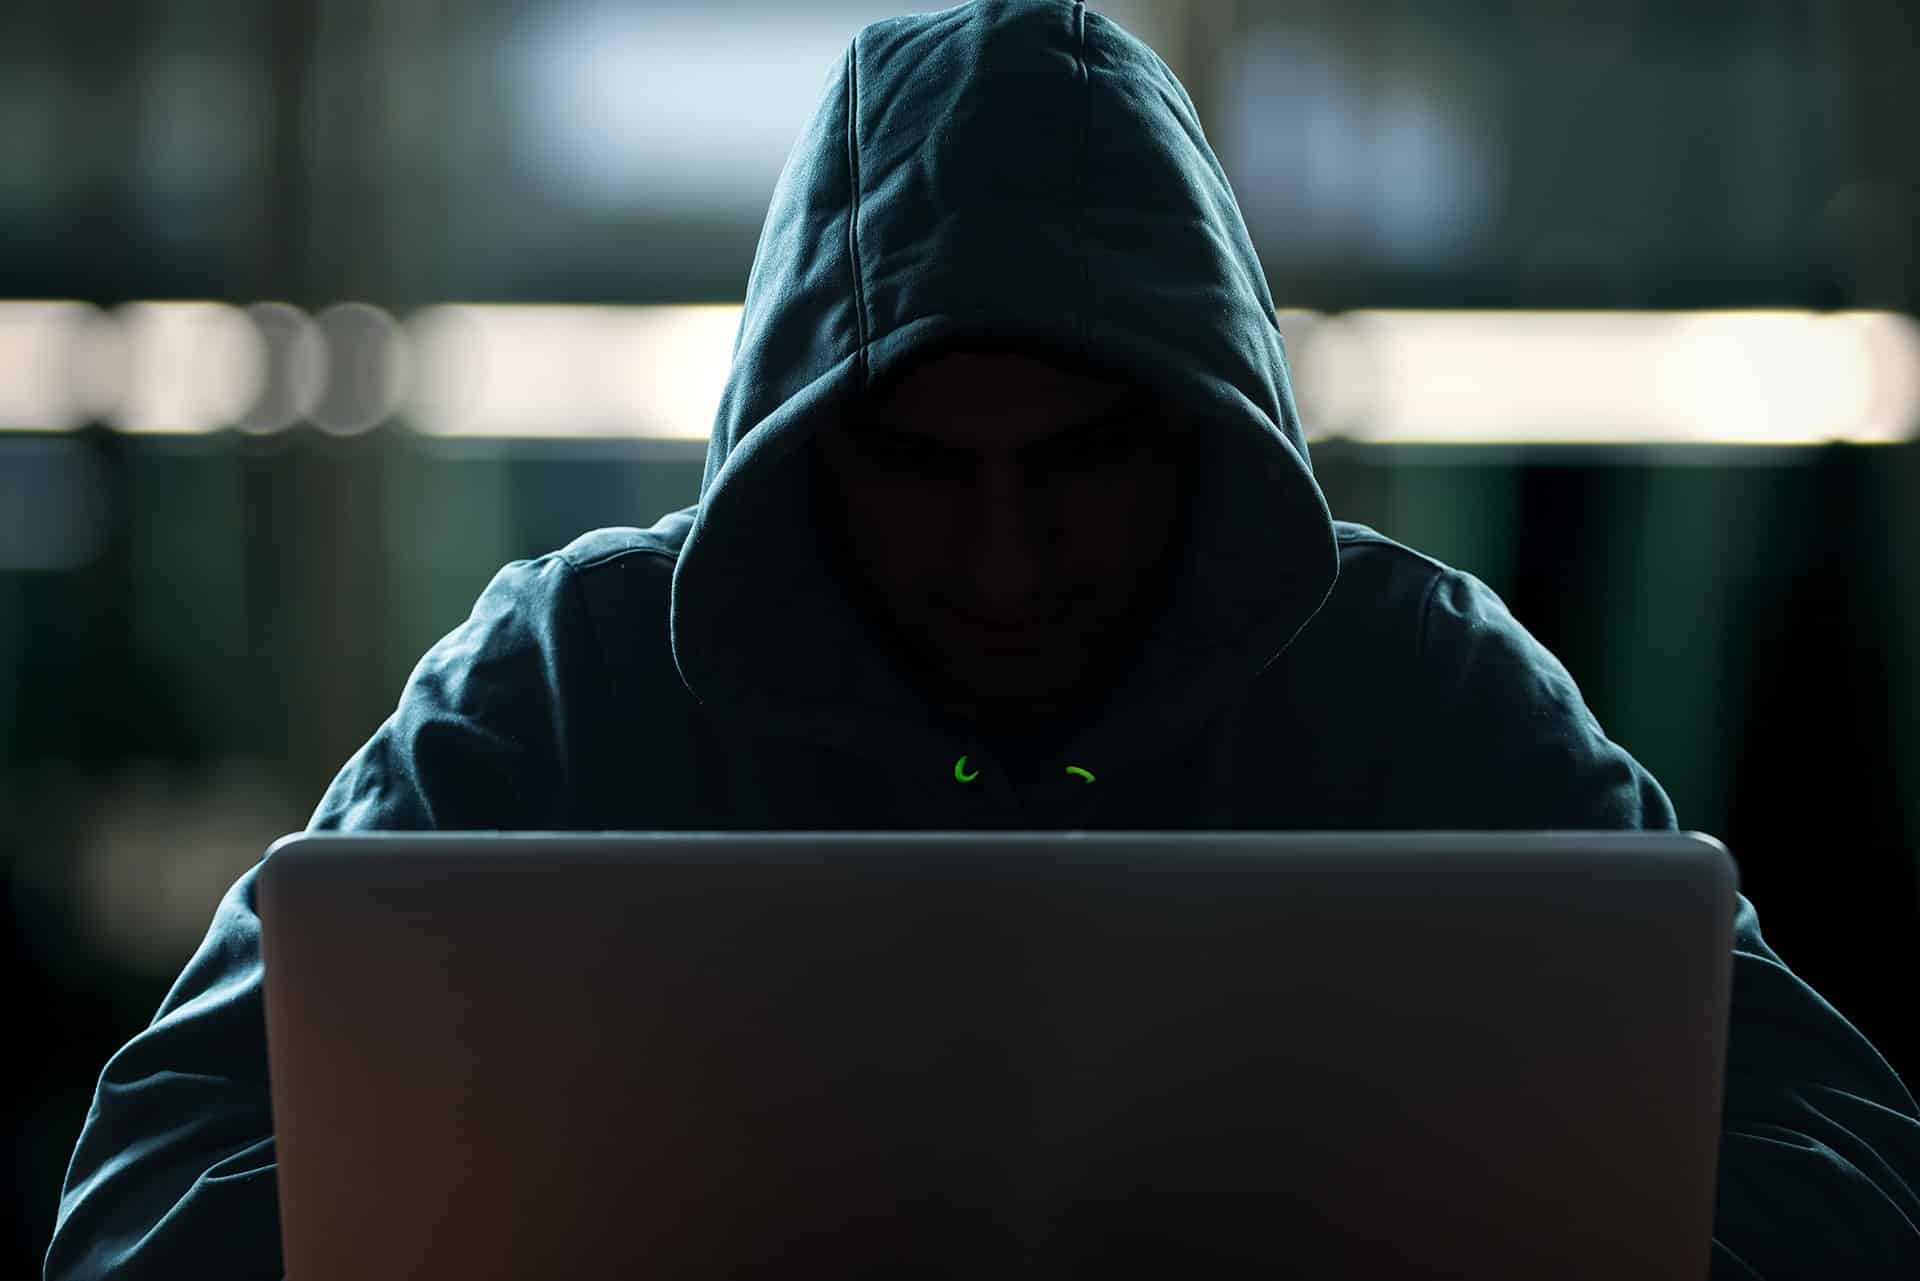 Computer Security: Staying Ahead of the Bad Guys